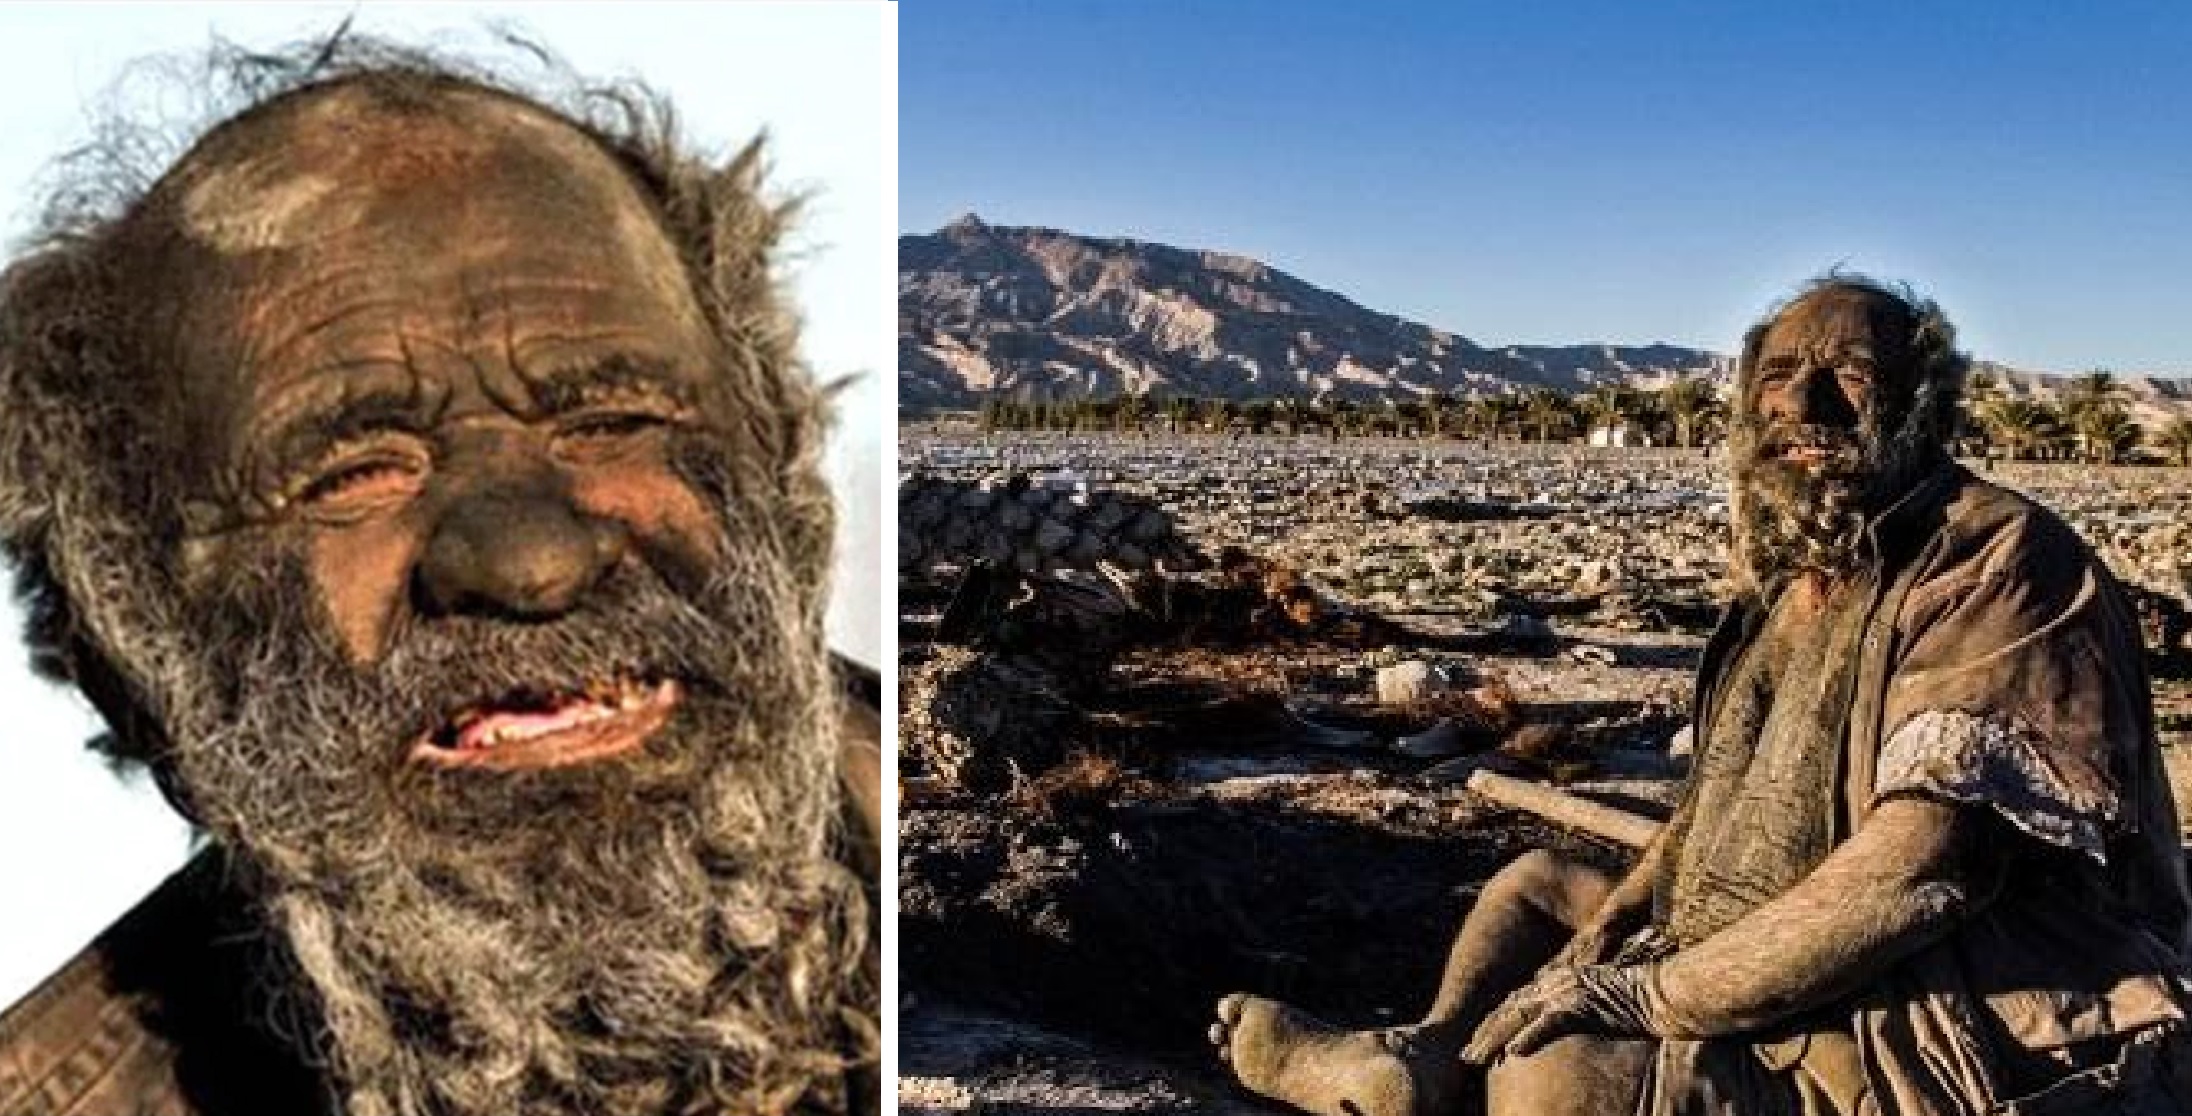 Meet The “World’s Dirtiest Man” Who Has Not Taken a Bath For Nearly 7 Decades